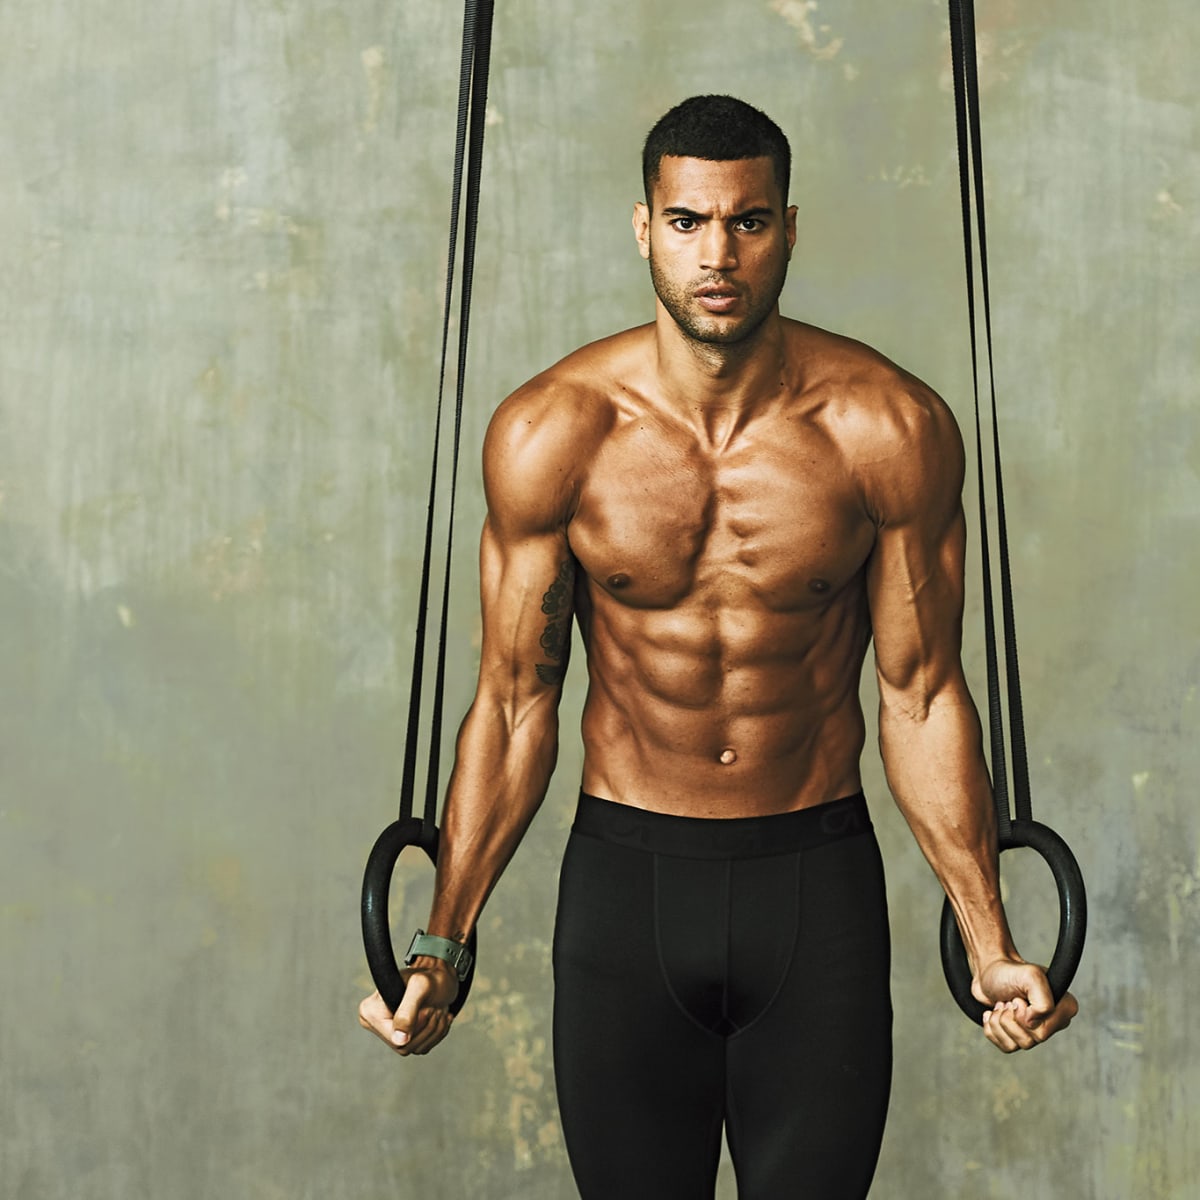 A Physique Coach Uses This Simple Cardio Routine to Stay Shredded